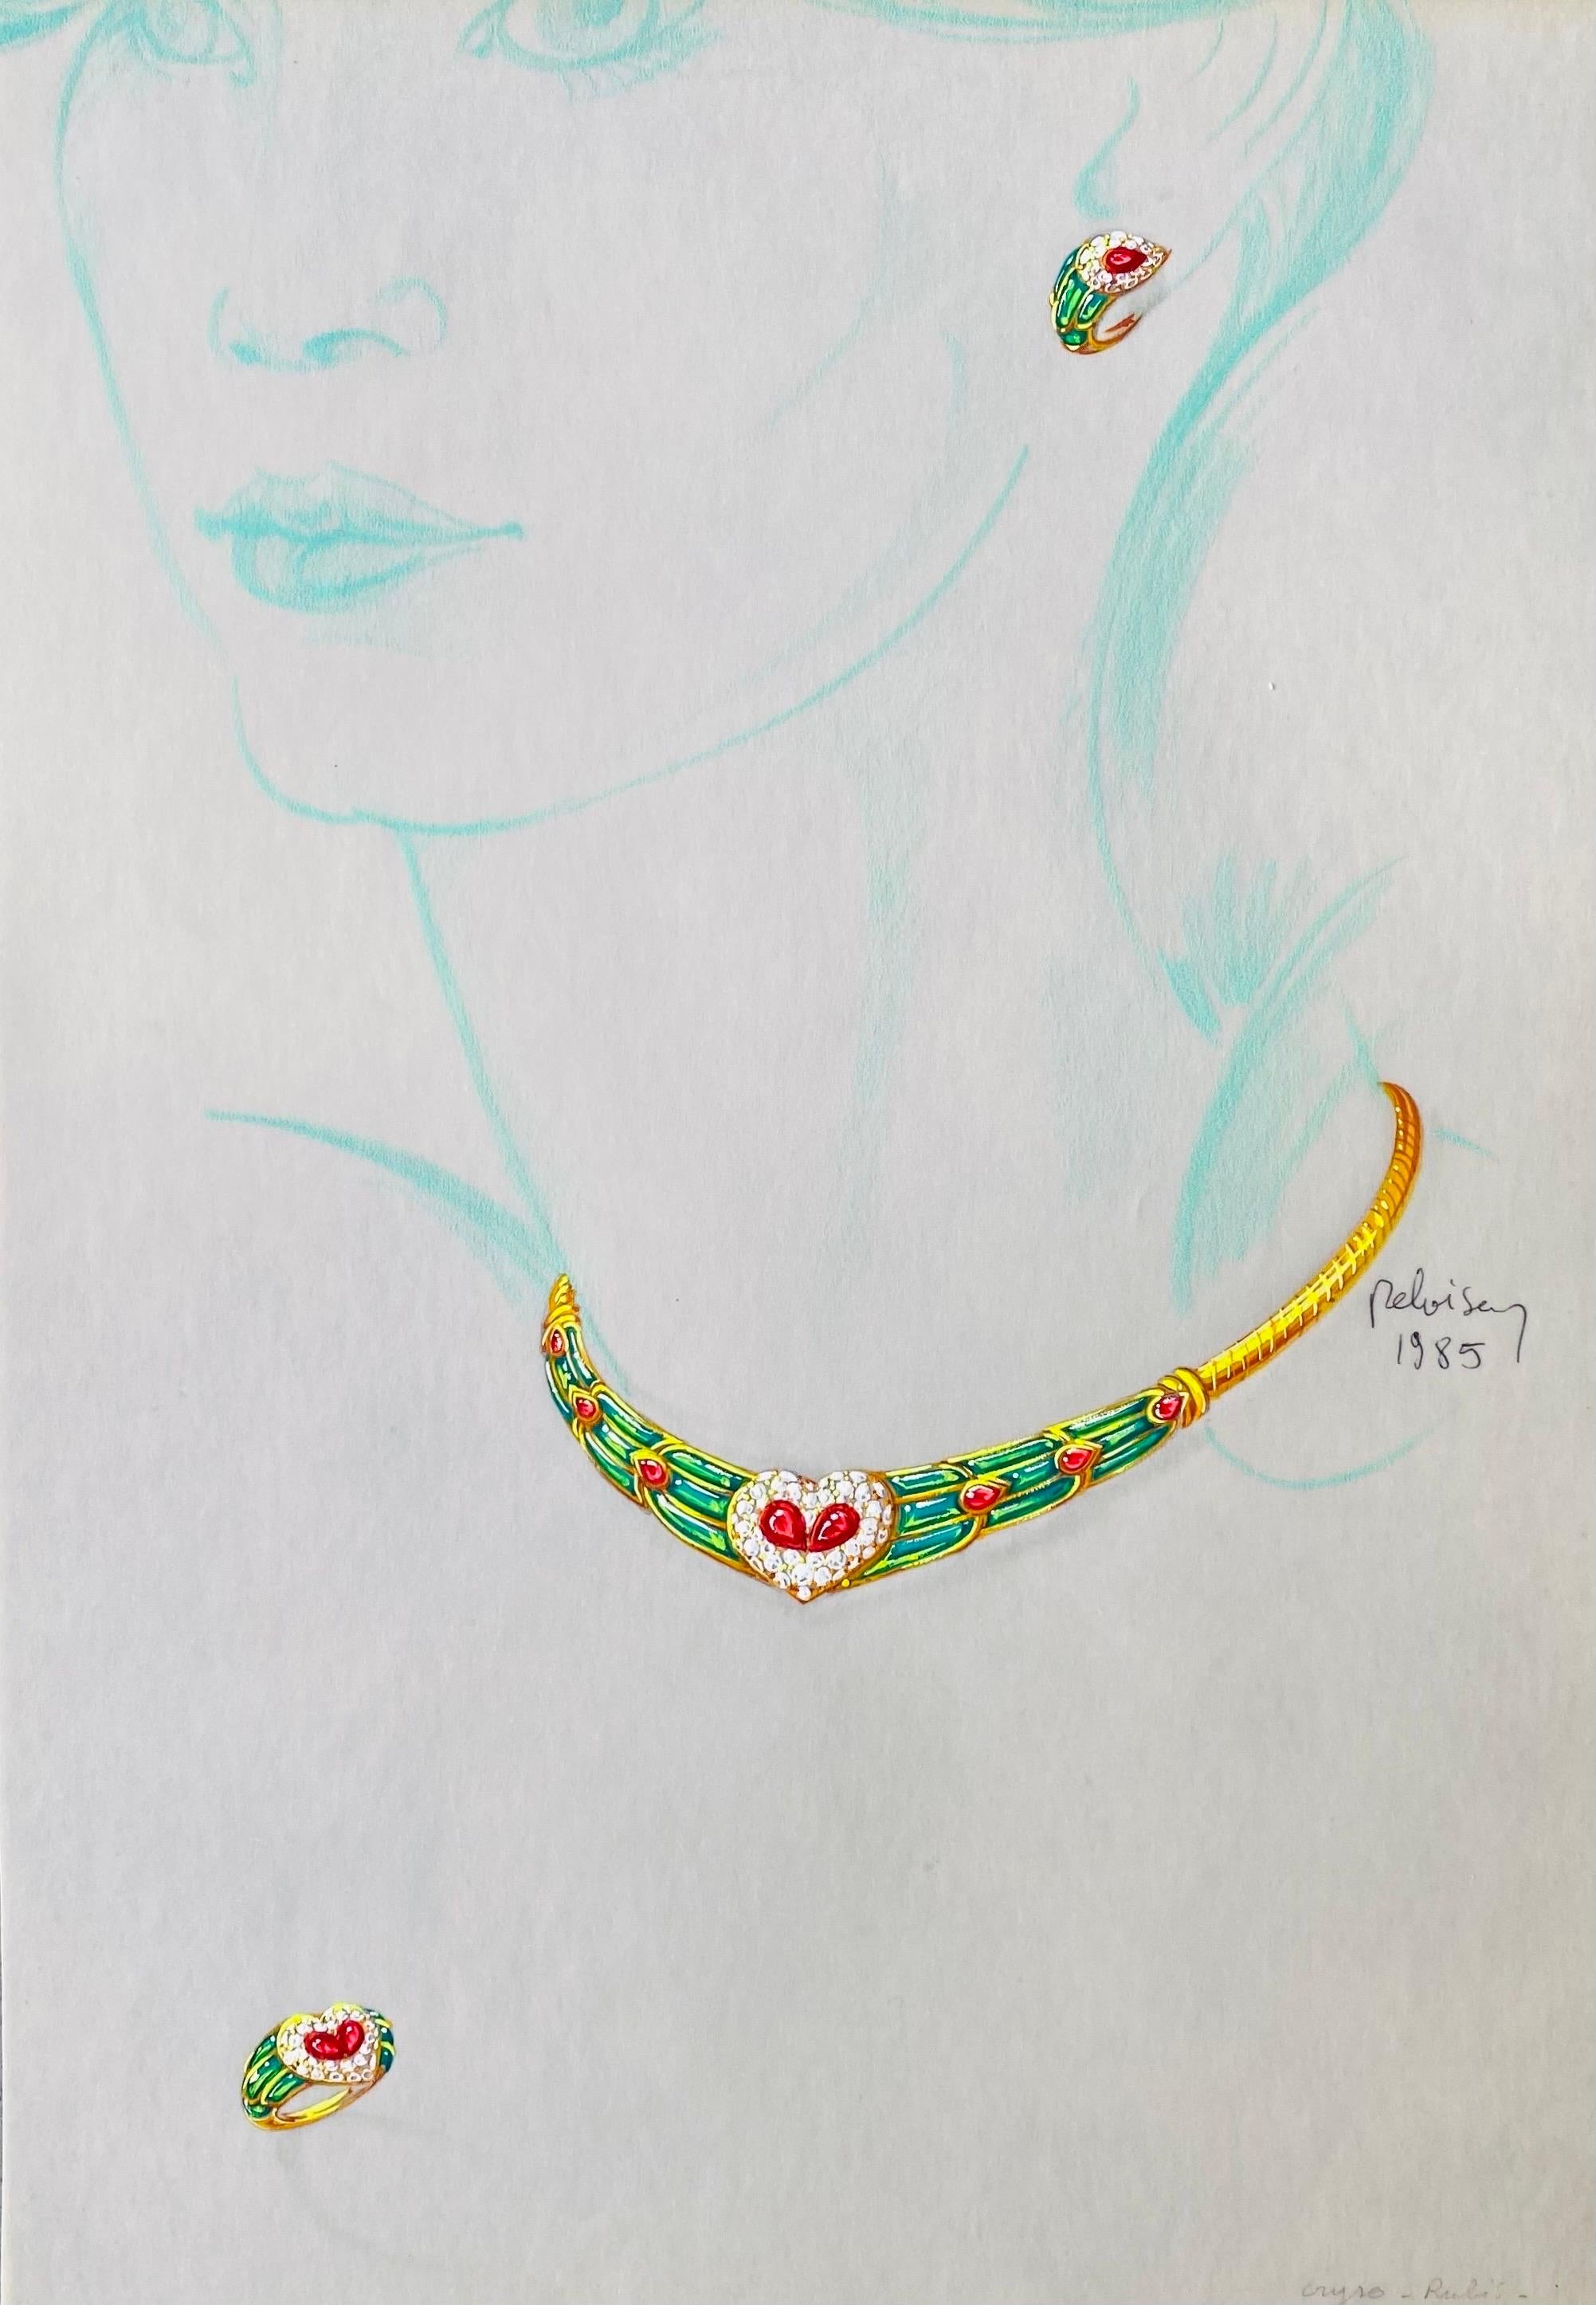 Philippe Deloison Figurative Art - Sketch for a jewel set - necklace and earrings - Van Cleef Bulgari Cartier Ruby